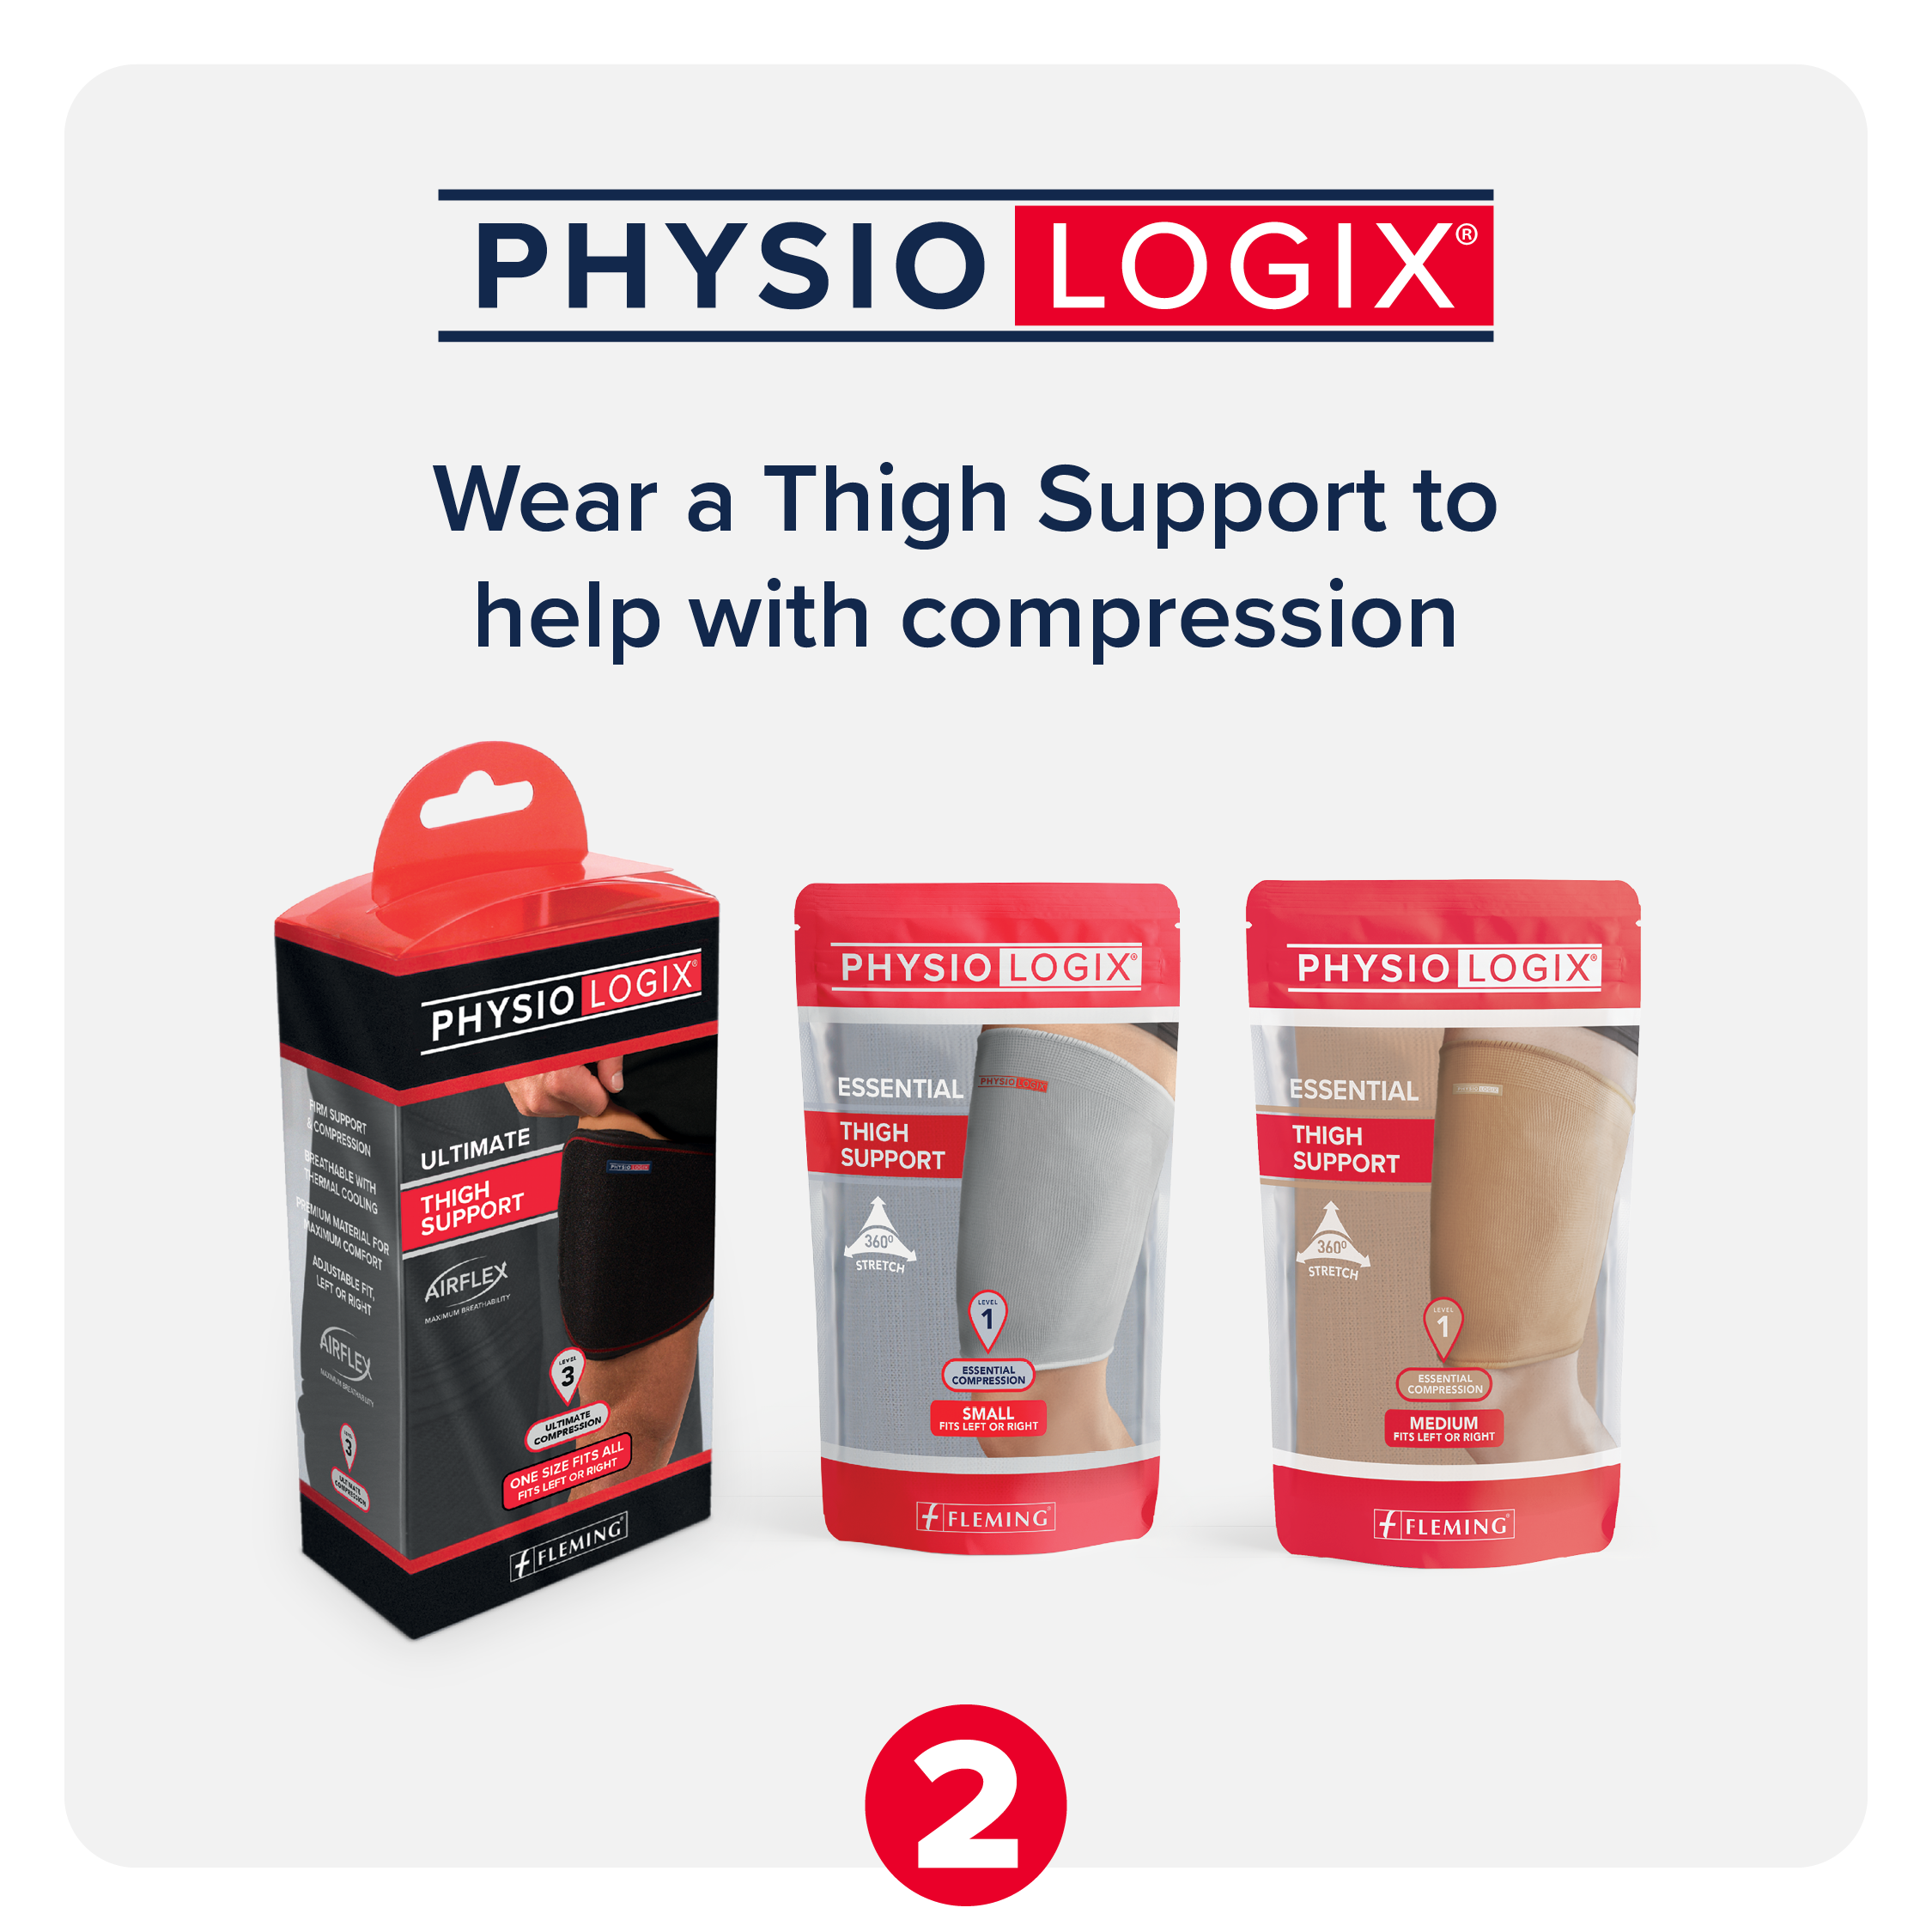 Wear a Thigh Support to help with Compression